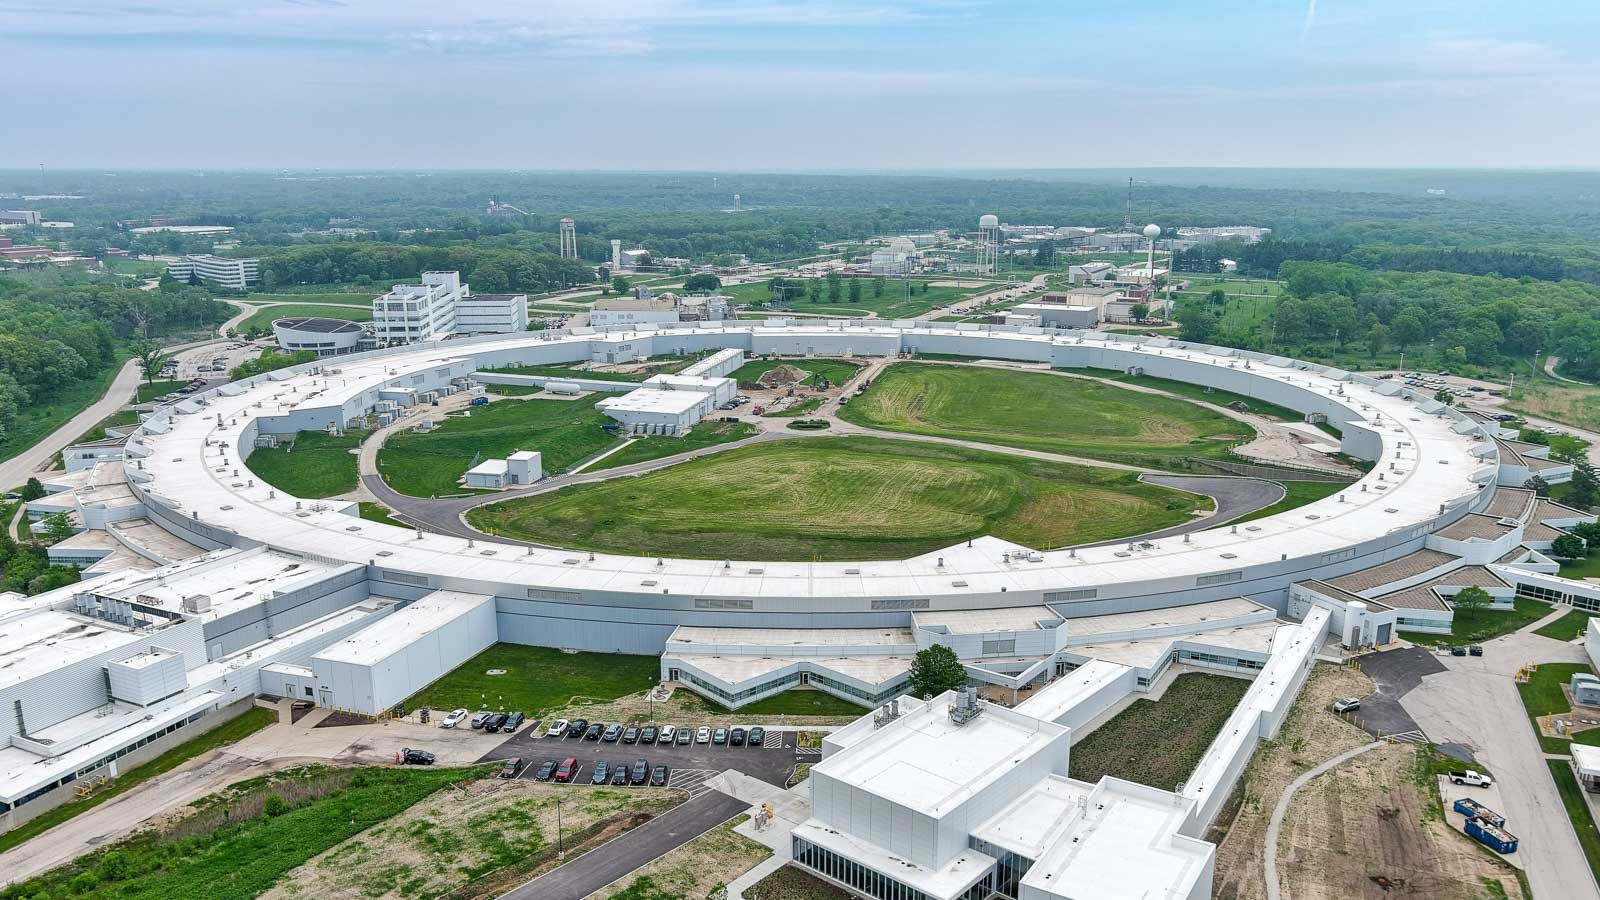 Large ring of laboratories from aerial view. (Image by Argonne National Laboratory.)